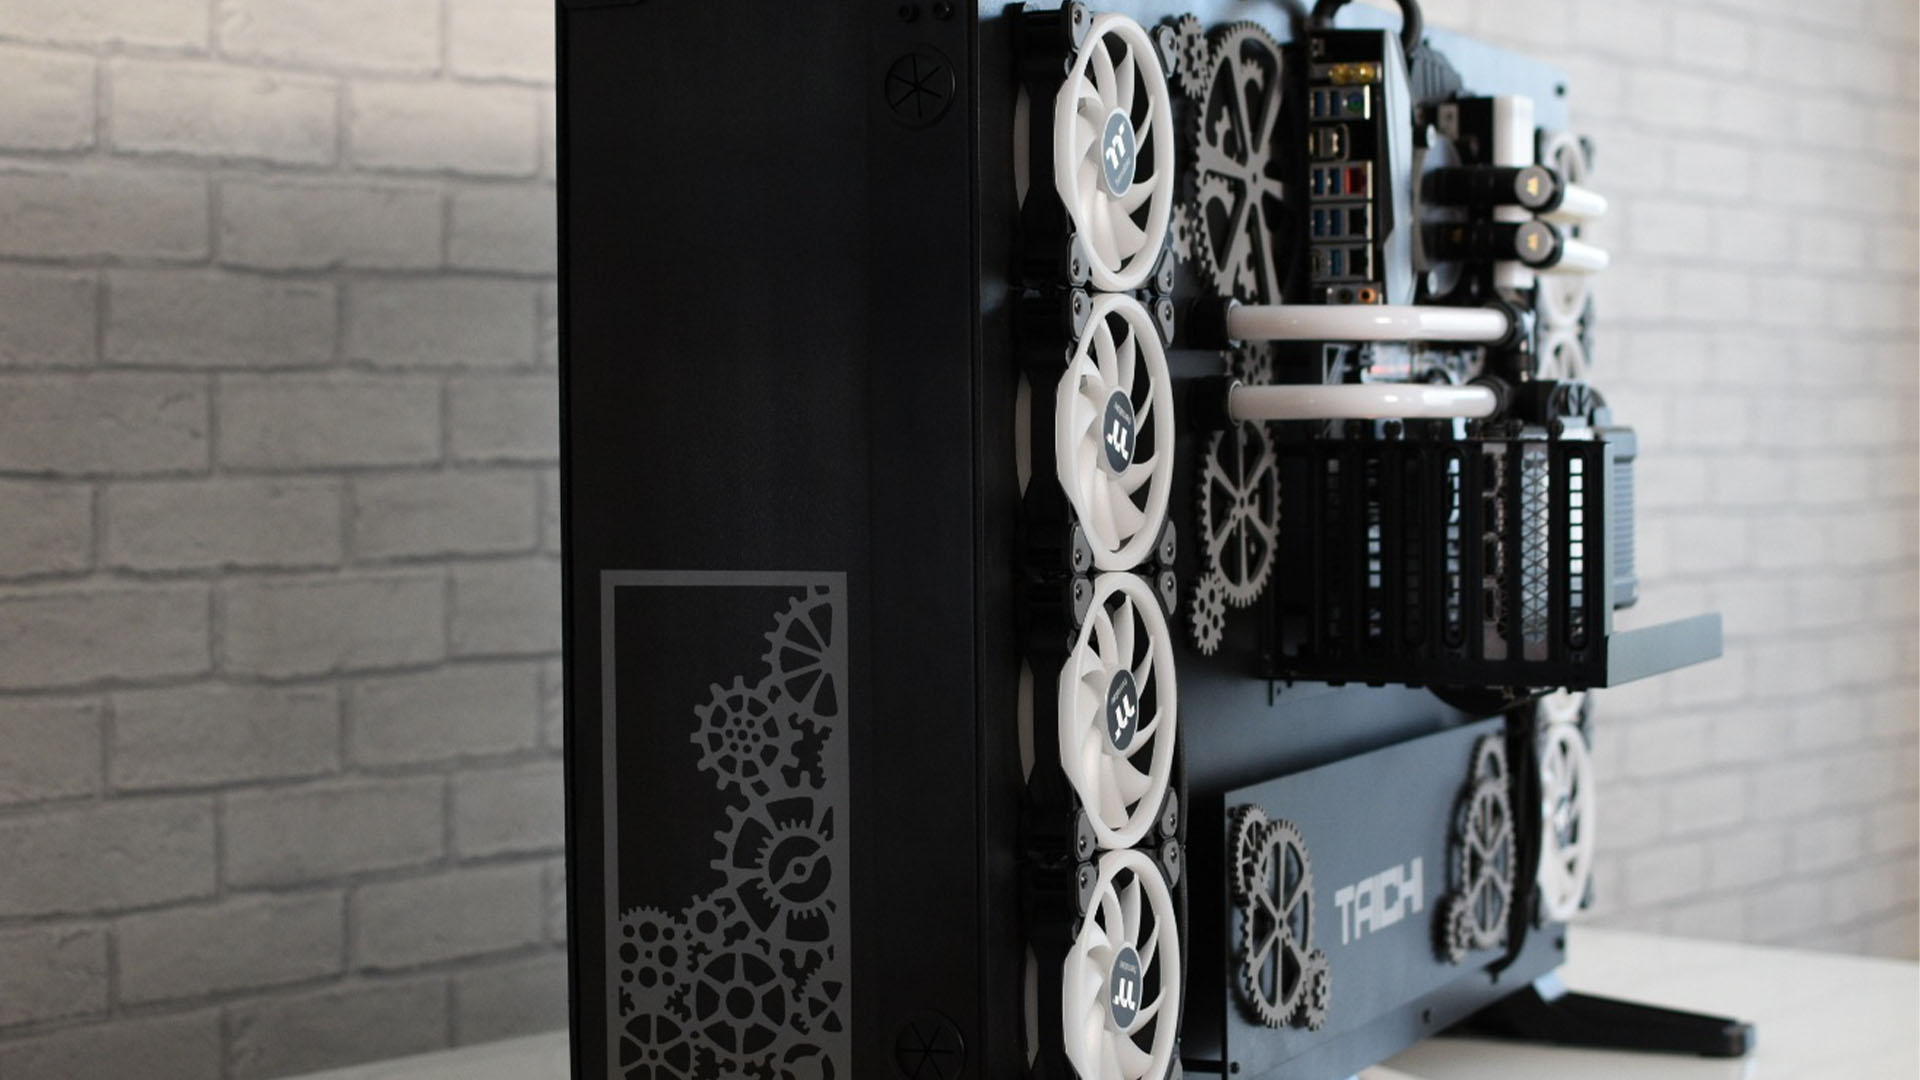 The side profile of the Project Taichi gaming PC build with black edges and white cogs